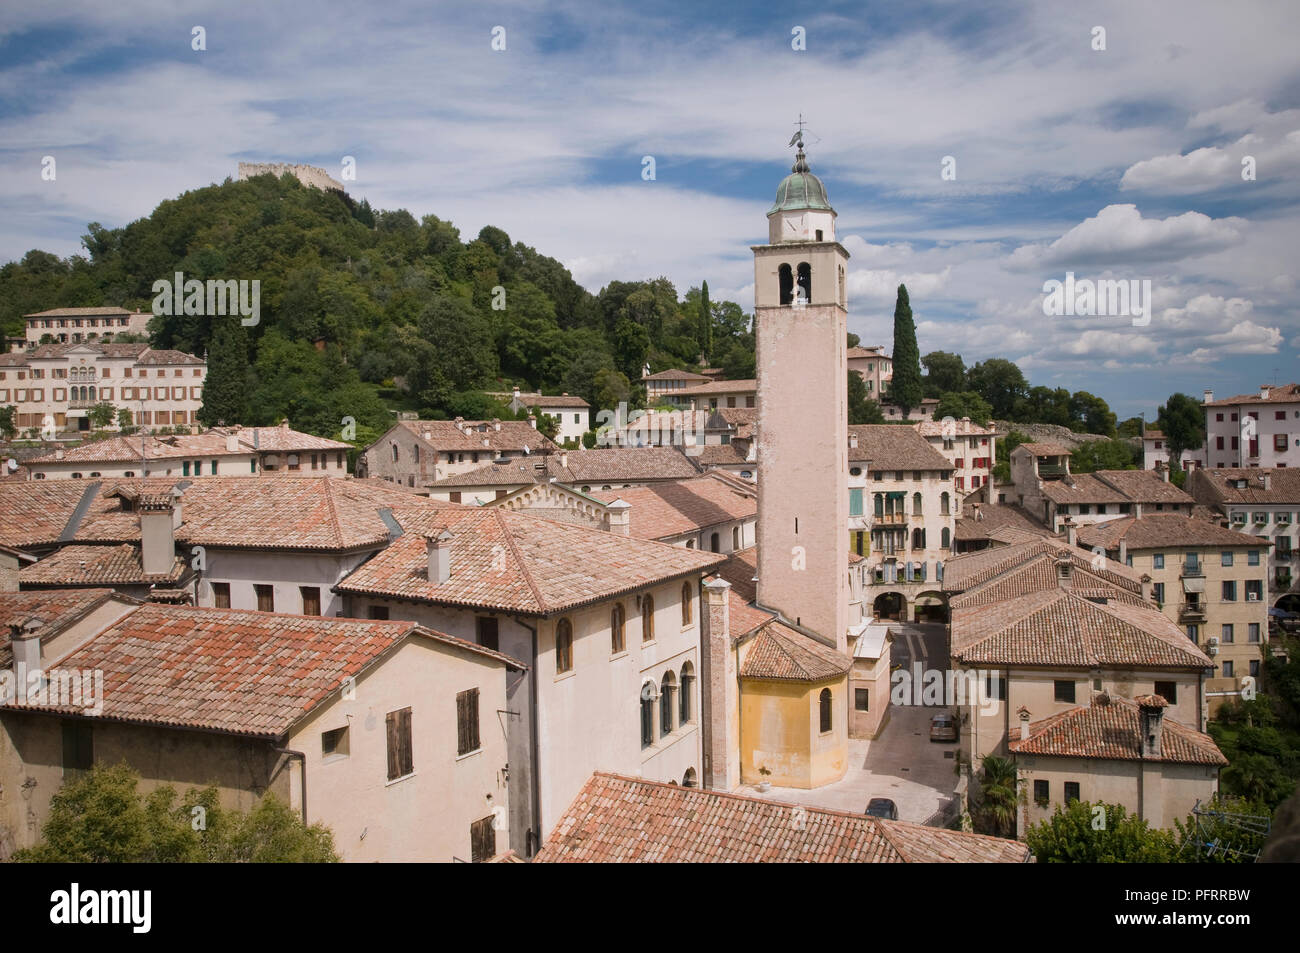 Italy, Veneto, Asolo, view of town and old church Stock Photo